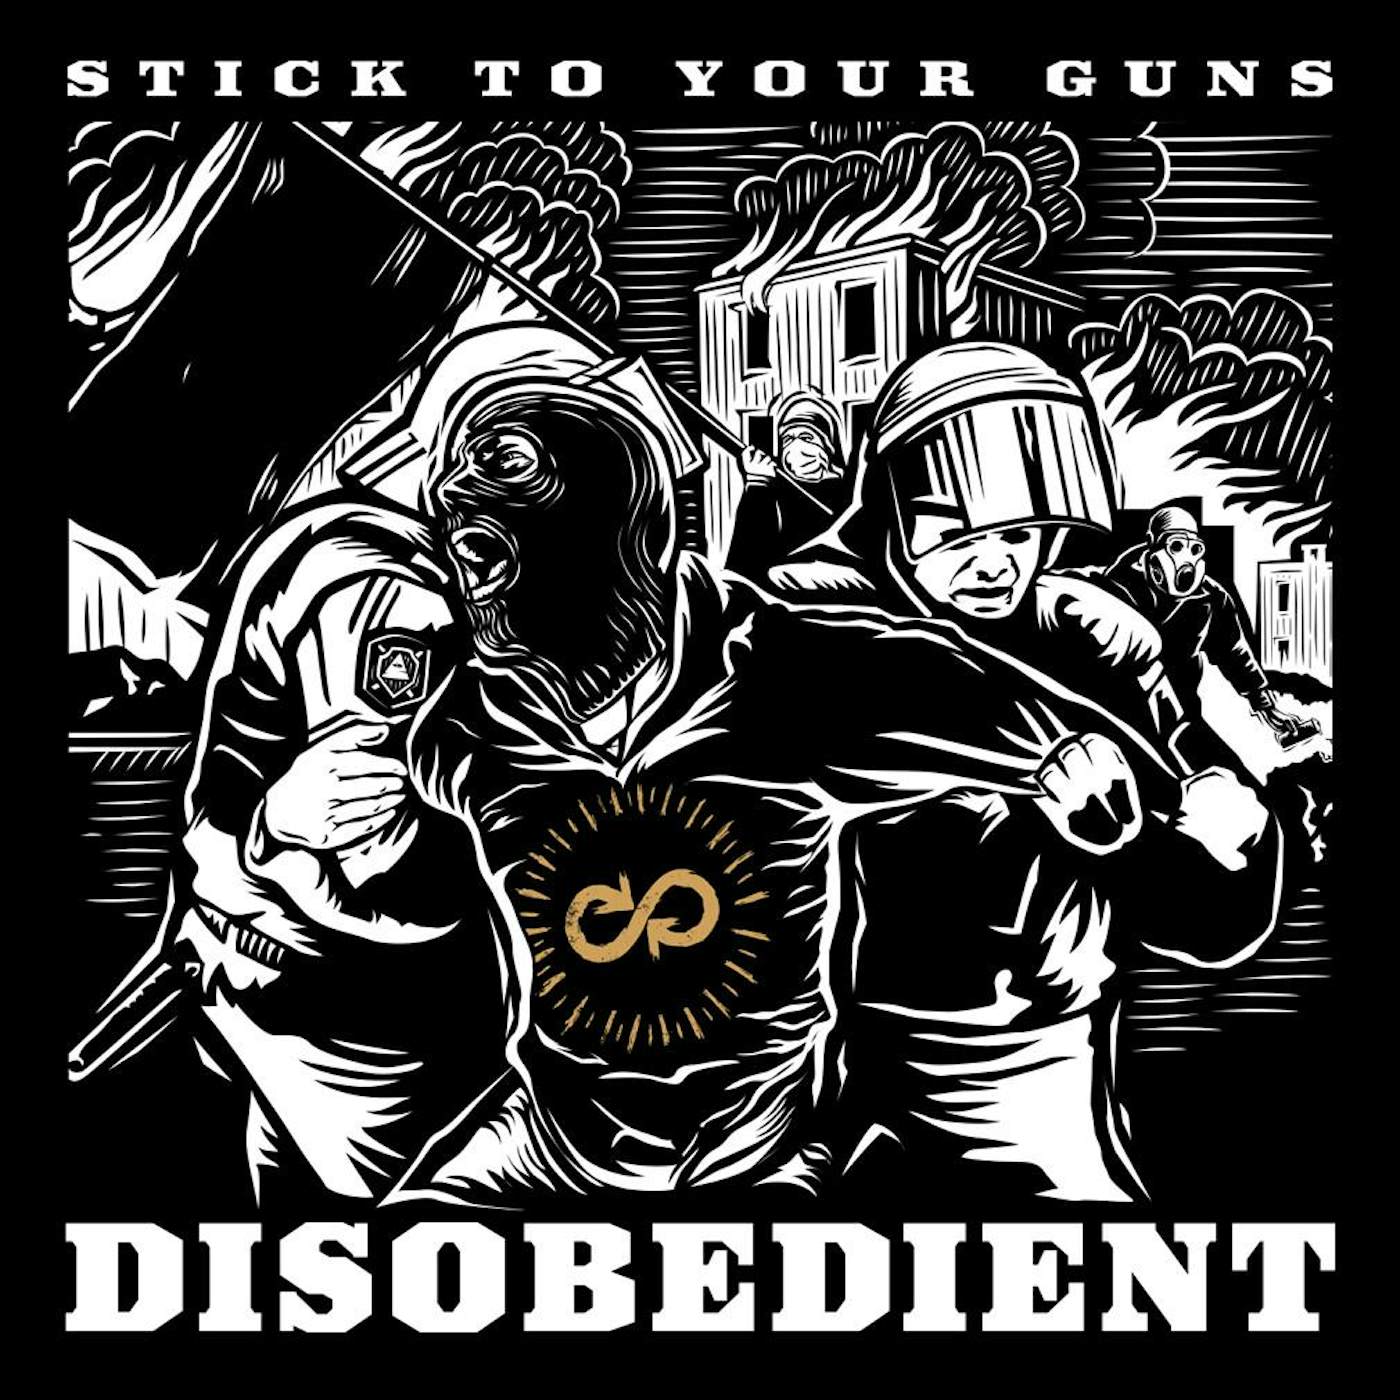 Stick To Your Guns - 'Disobedient' CD